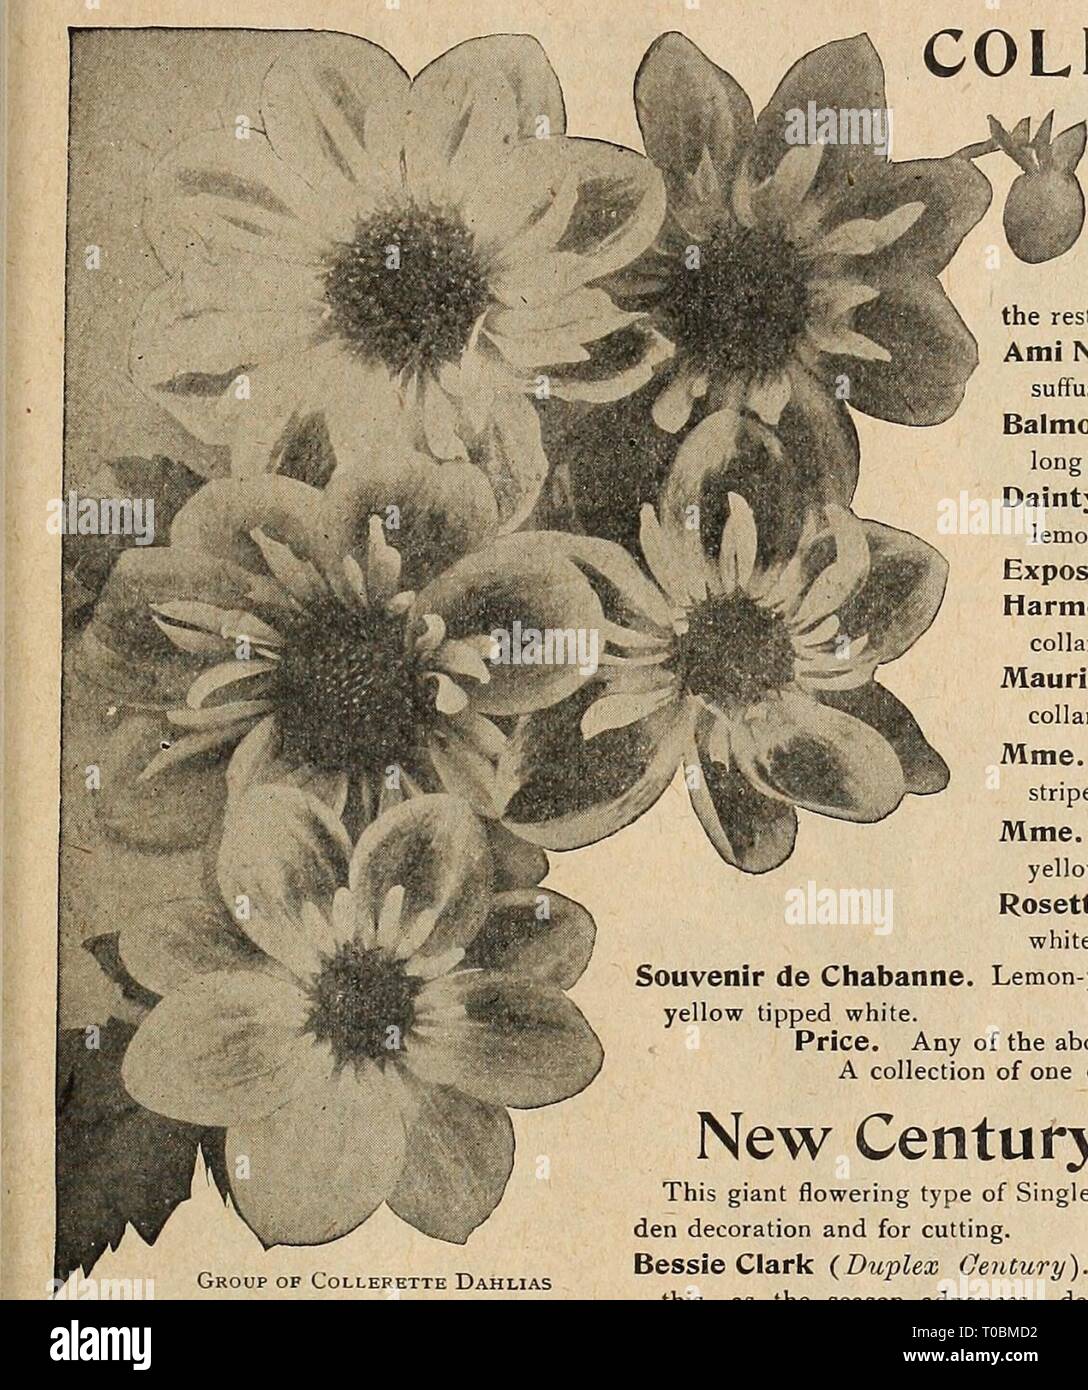 Dreer's garden book 1920 (1920) Dreer's garden book 1920 dreersgardenbook1920henr 0 Year: 1920  I HiRrlDKER-PmLAOitRHIA • Wlf GAMEMRMHOUSE PLANTS 1 151 COLLERETTE DAHLIAS The Collerette Dahlias have single flow- ers with an additional row of short petals around the disc, forming a frill or collar, which is usually of a different color from the rest of the flower. Ami Nonin. Dark crimson-carmine, collar white suffused rose; very large. Balmoral. Deep aniline-red'shaded purple, with long narrow white collar petals. Dainty. Soft rose, deepening to carmine centre, lemon-yellow collar. Exposition d Stock Photo